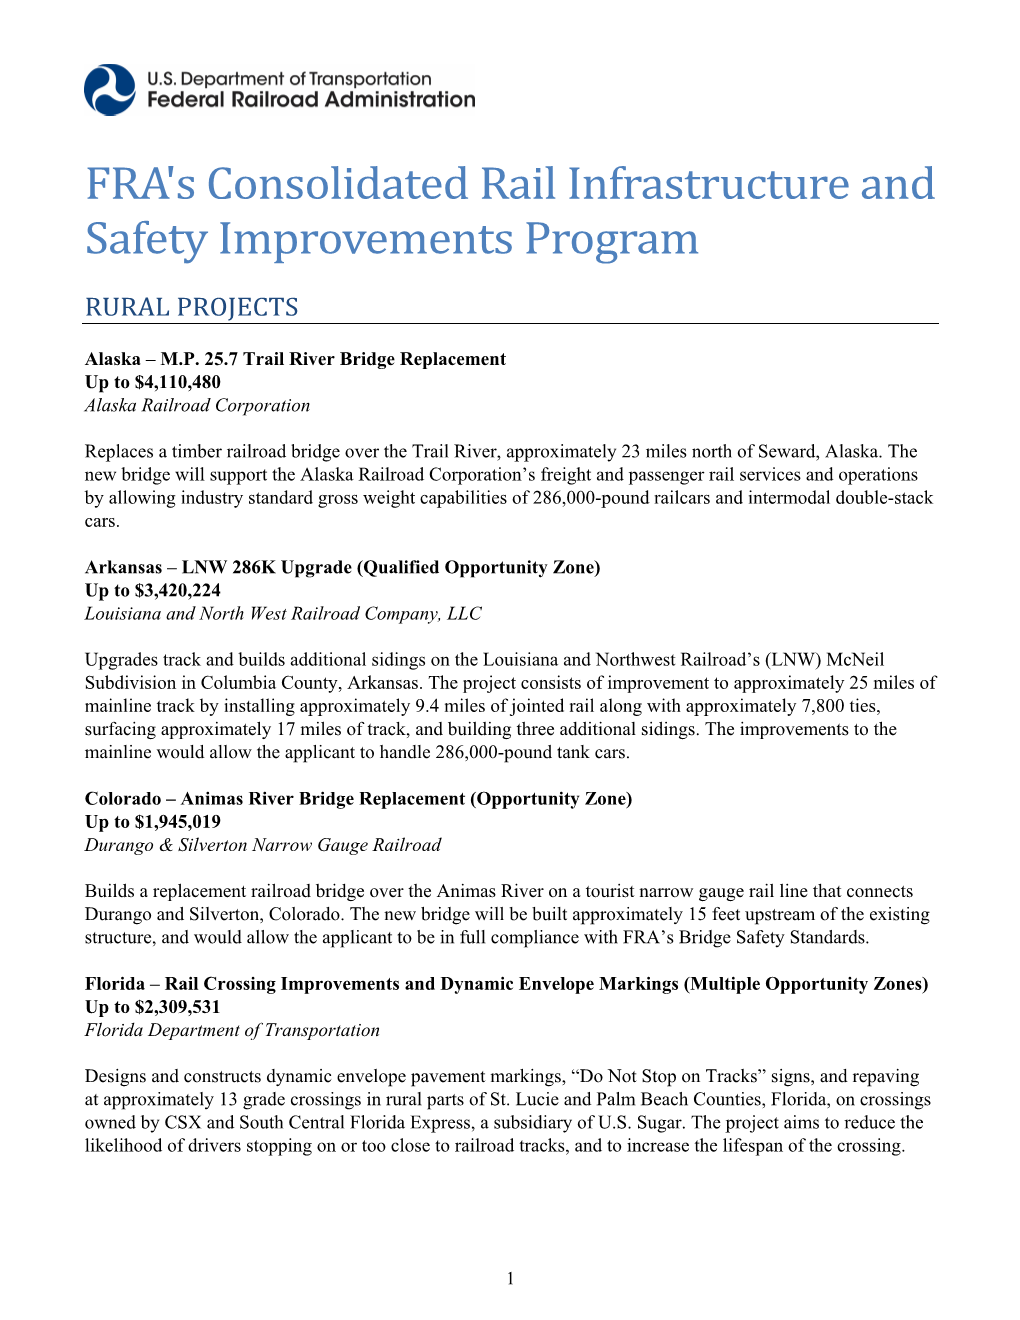 FRA's Consolidated Rail Infrastructure and Safety Improvements Program